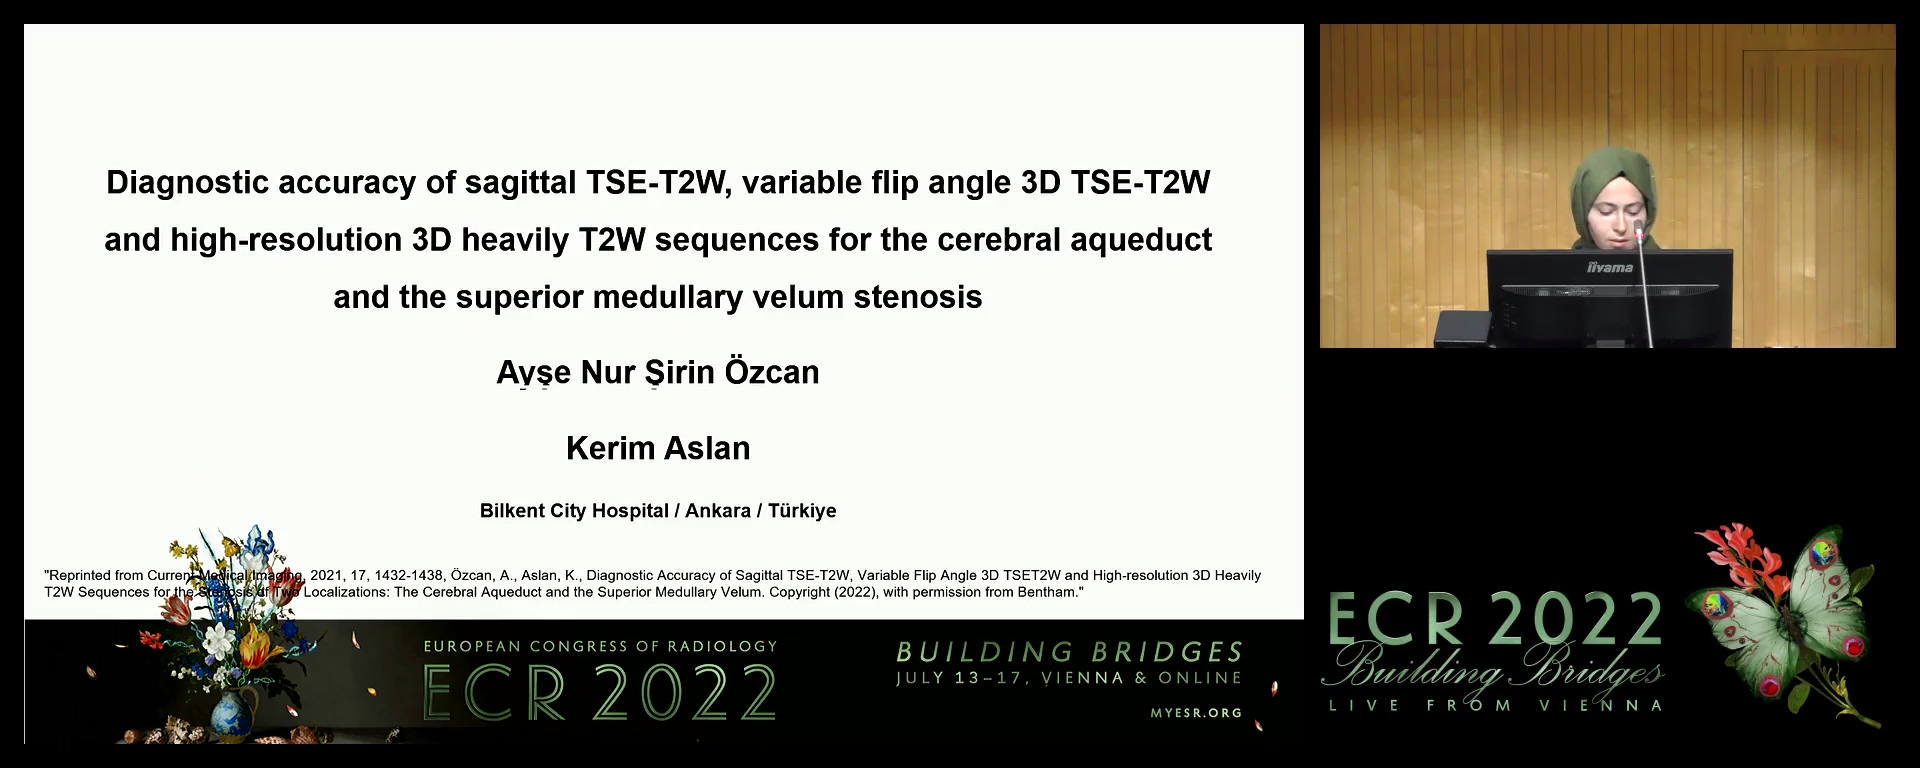 Diagnostic accuracy of sagittal TSE-T2W, variable flip angle 3D TSE-T2W and high-resolution 3D heavily T2W sequences for the cerebral aqueduct and the superior medullary velum stenosis - Ayşe Nur Özcan, ANKARA / TR